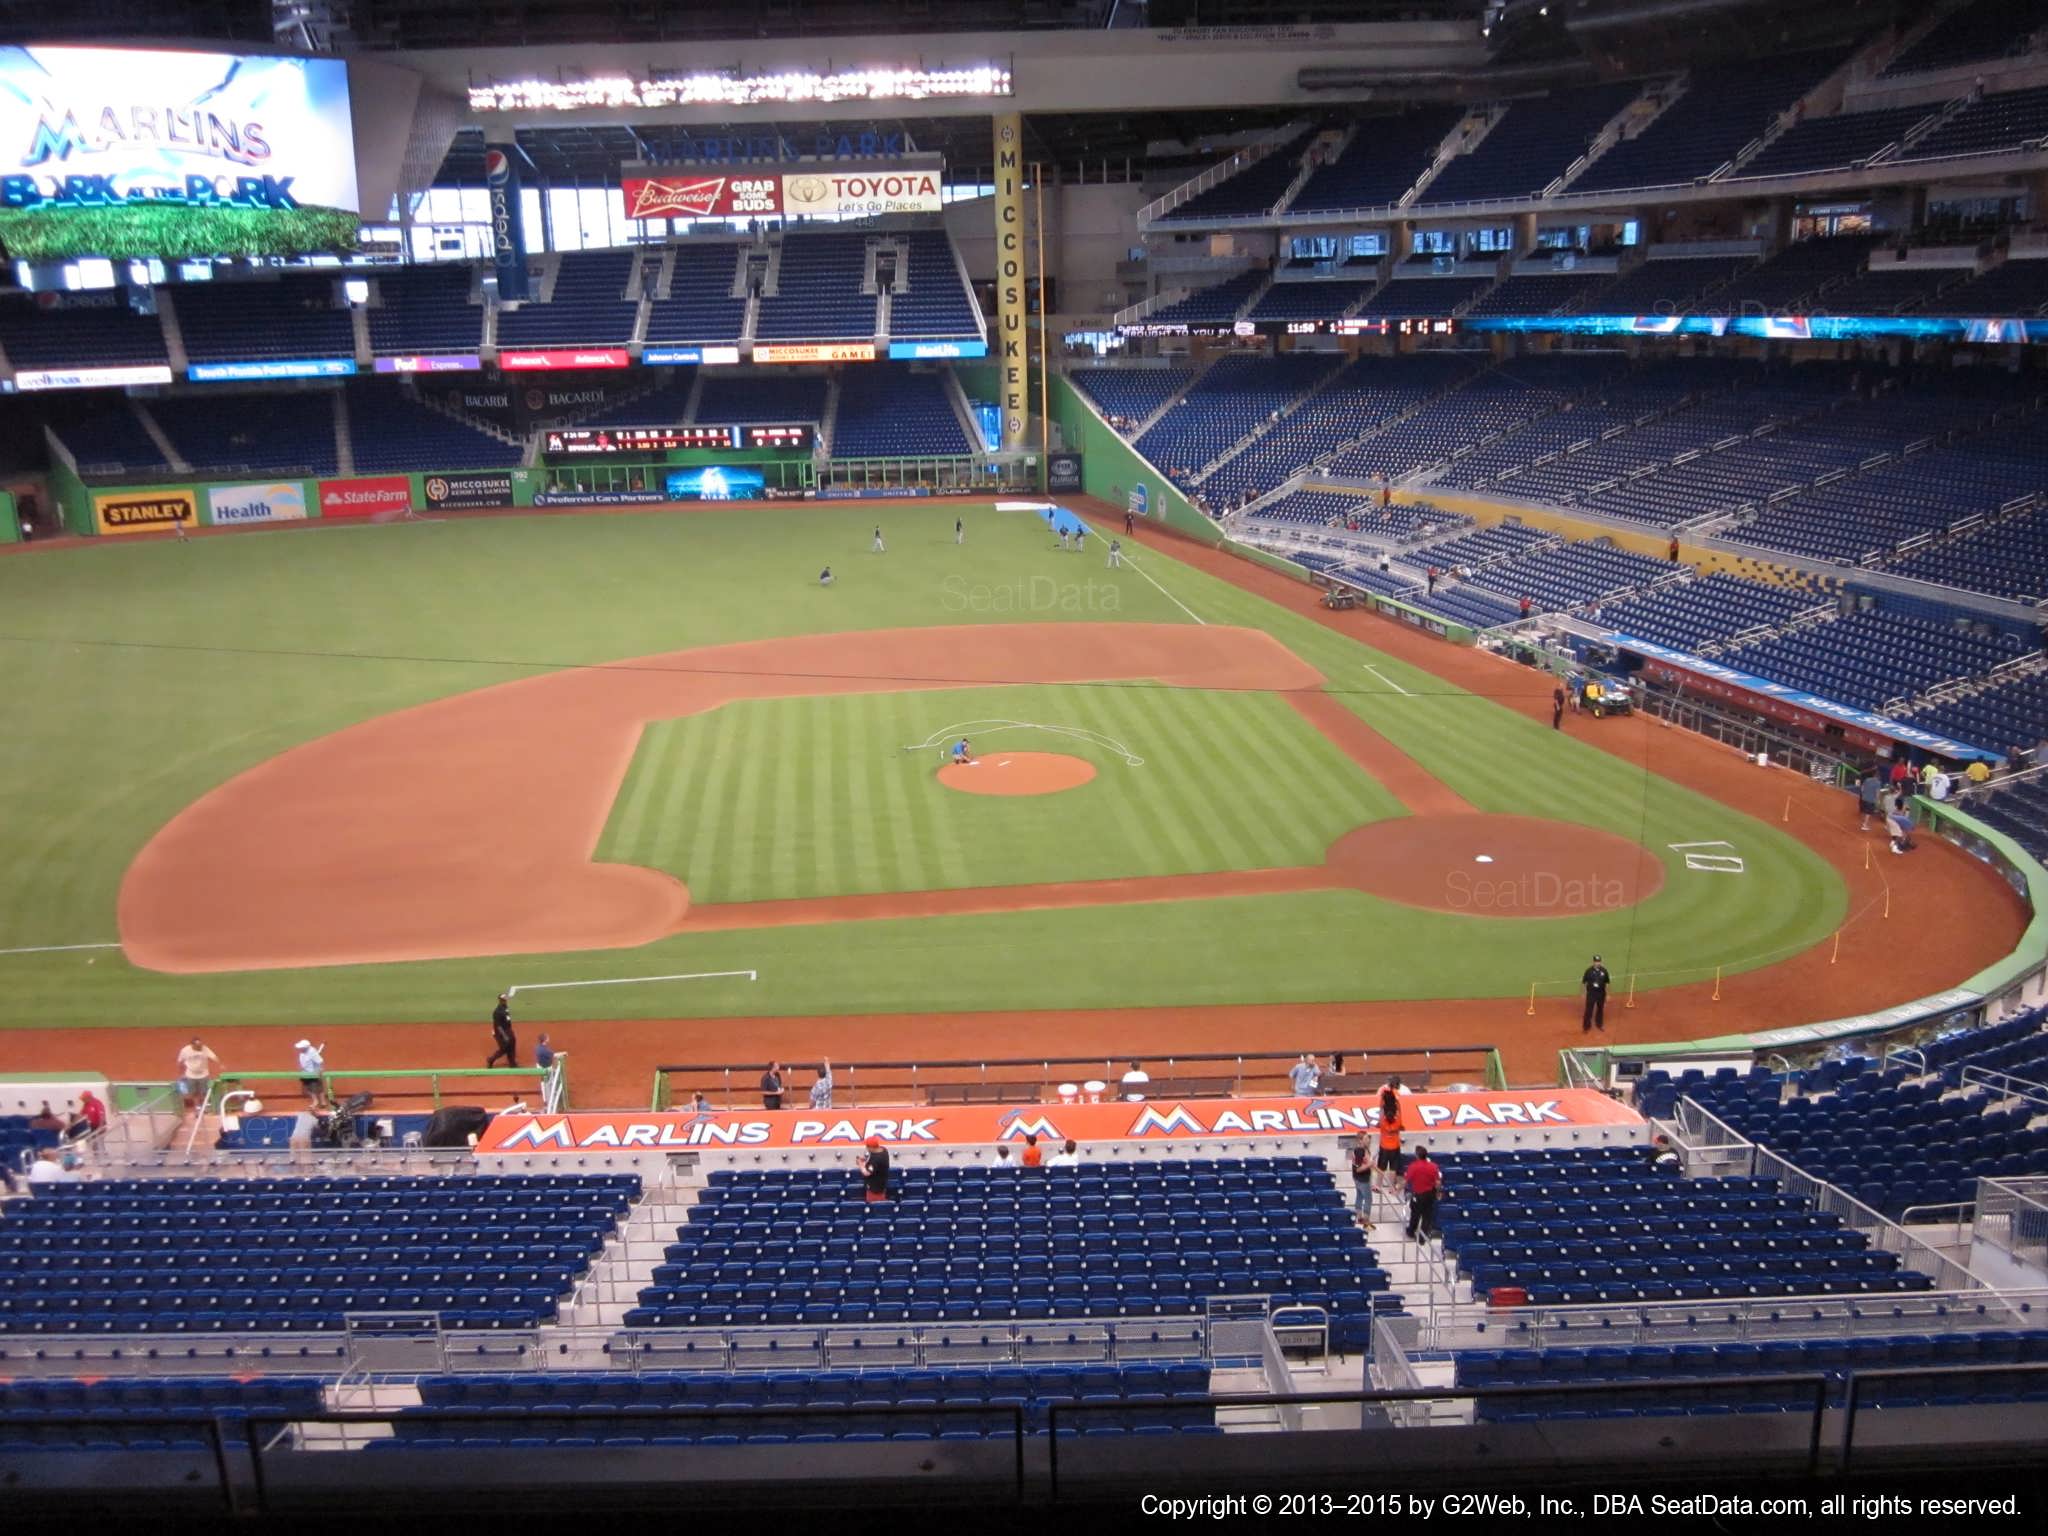 Seat view from section 220 at Marlins Park, home of the Miami Marlins